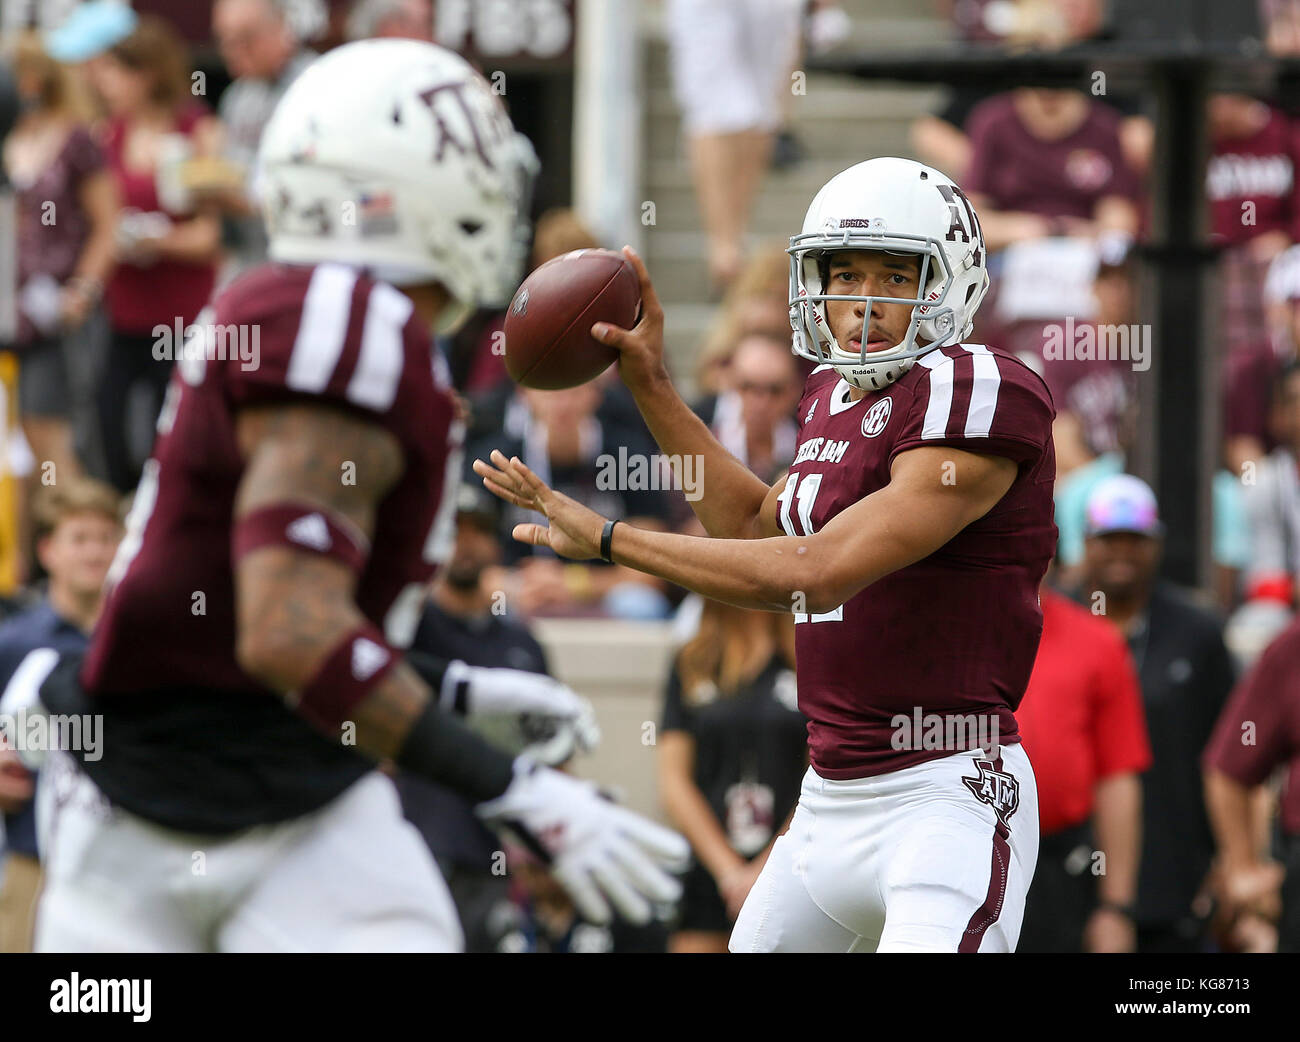 November 4, 2017: Texas A&M Aggies quarterback Kellen Mond (11) sets up to throw in the first quarter during the NCAA football game between the Auburn Tigers and the Texas A&M Aggies at Kyle Field in College Station, TX; John Glaser/CSM. Stock Photo